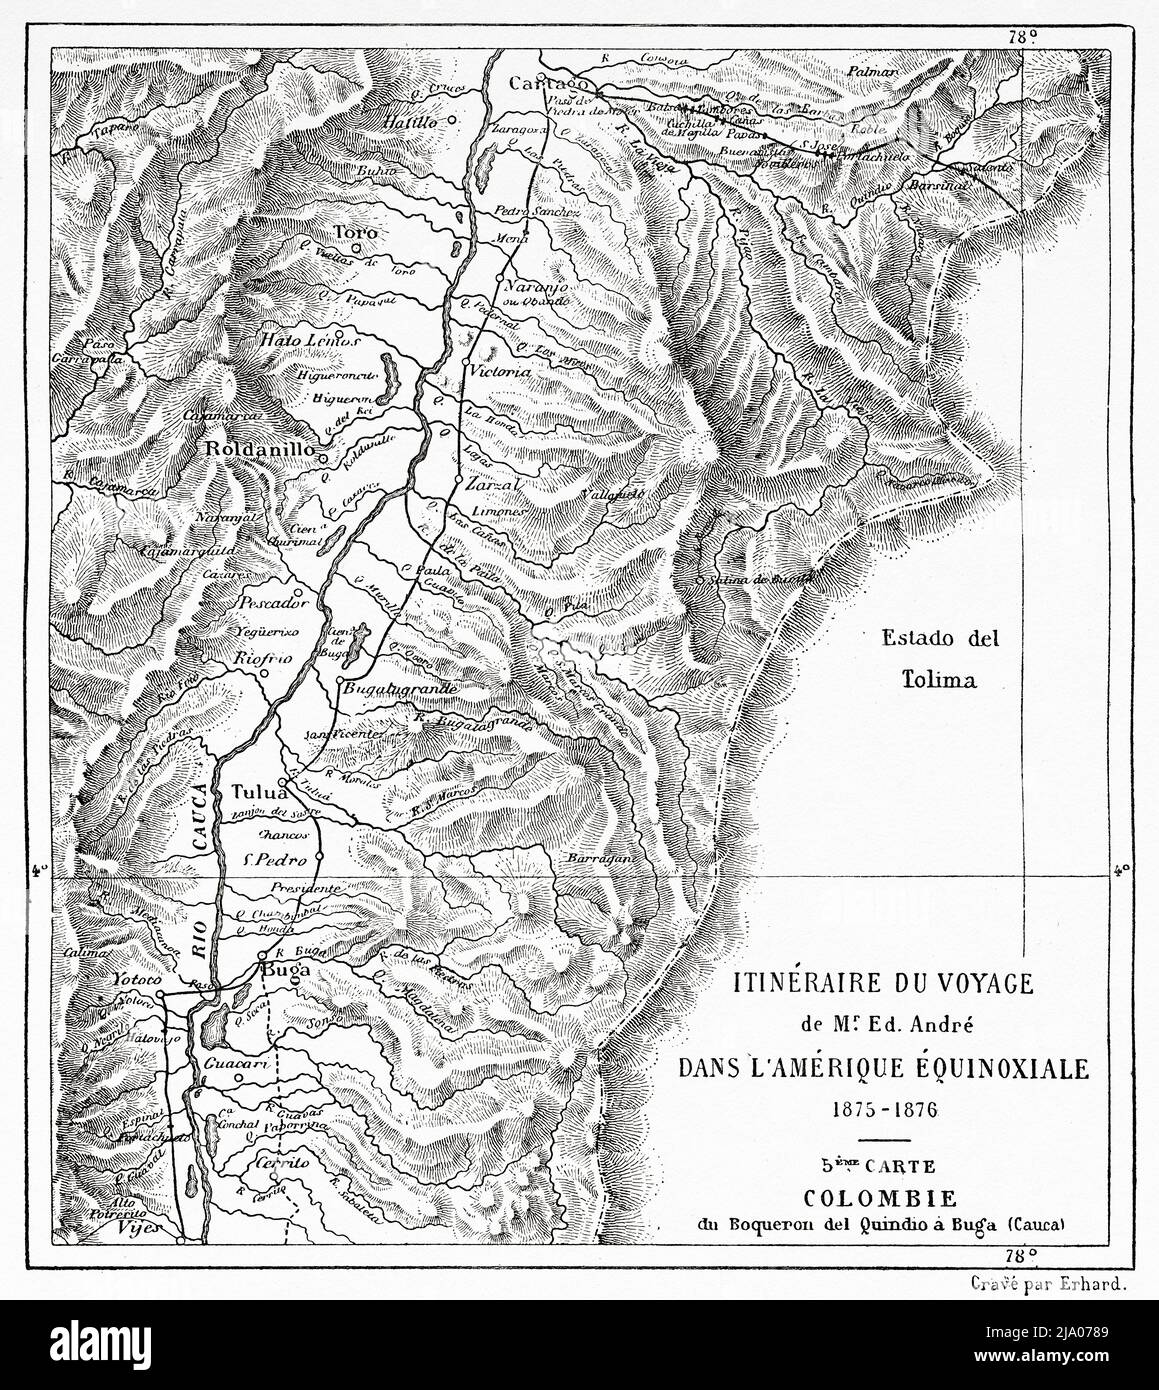 From Boquerón de Quindío to Buga, Cauca Department. Colombia, South America. Travel itinerary map through Equinoctial America 1875-1876 by Edward Francois Andre. Le Tour du Monde 1879 Stock Photo